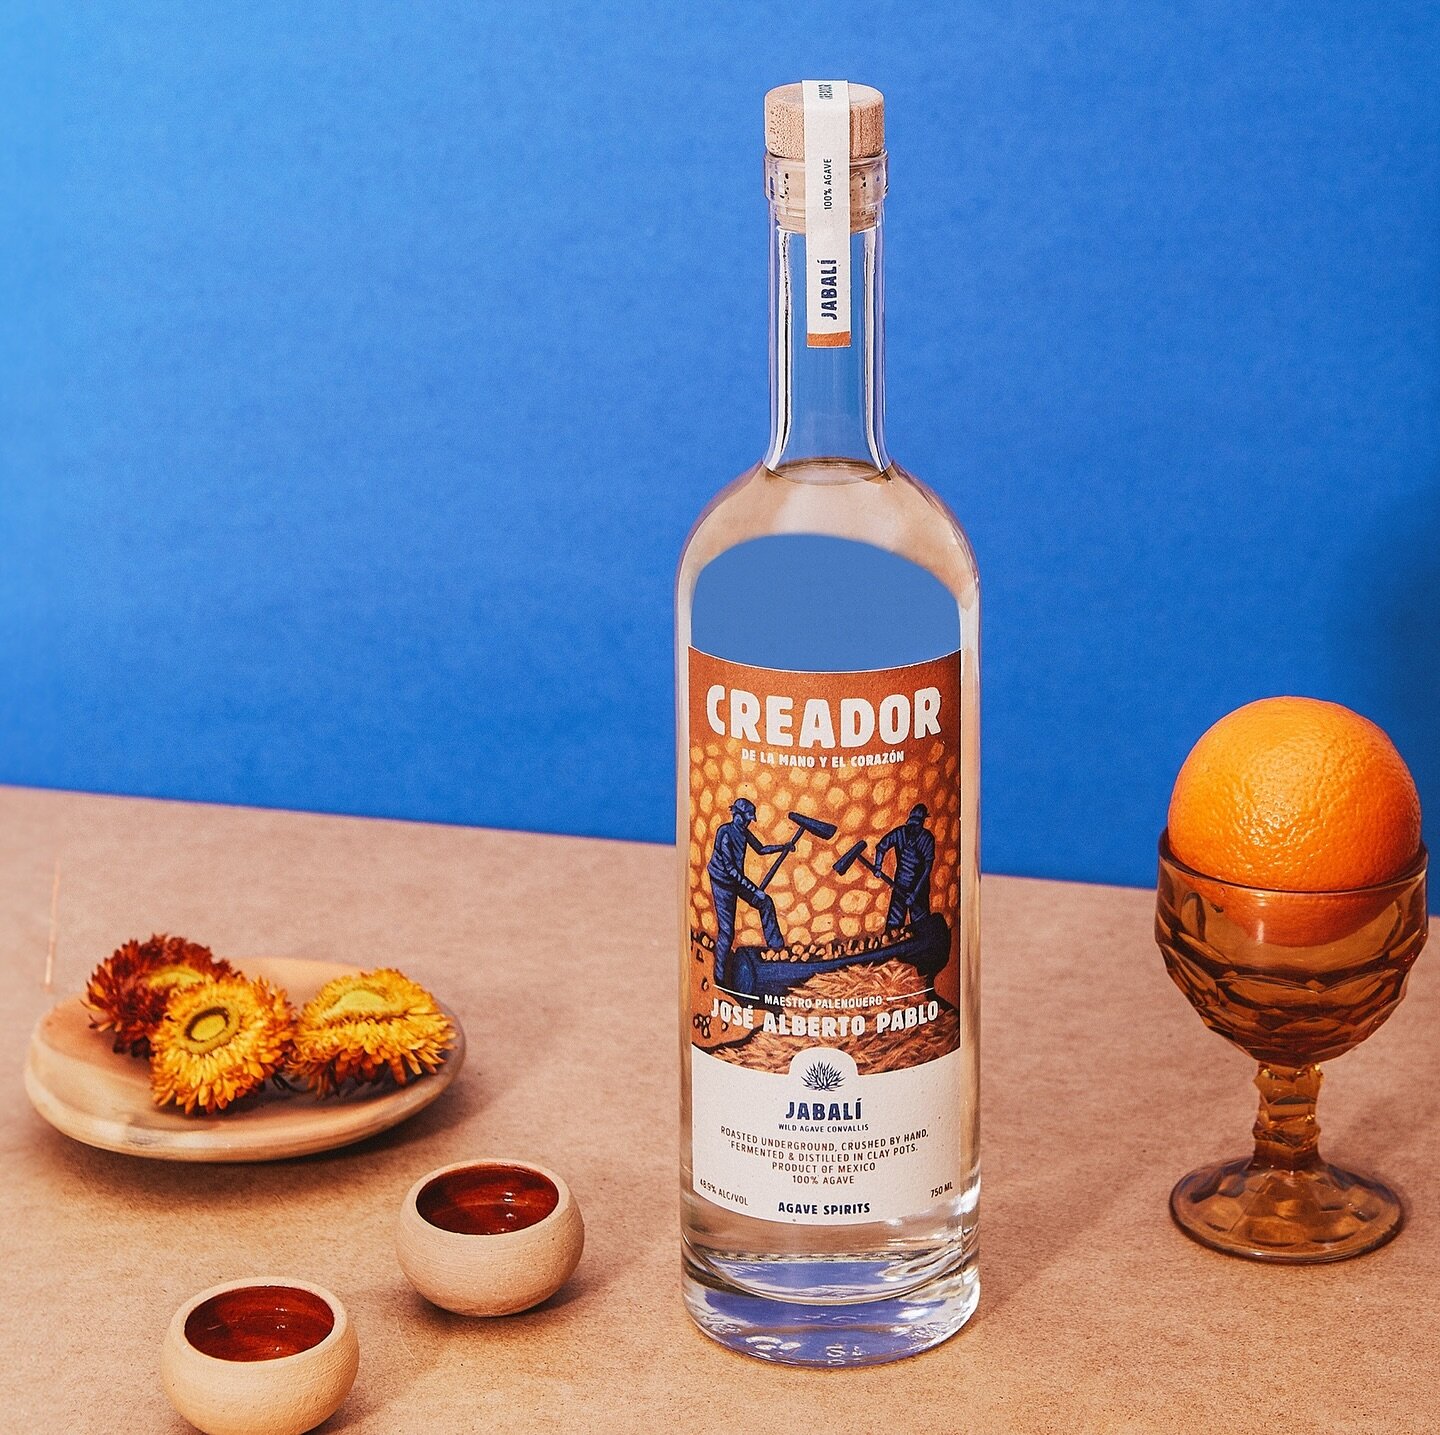 Creador Jabal&iacute; at mezcalreviews.com -

&ldquo;Winter squash like pumpkin and butternut. Warm winter spices&hellip;If ever there was a &ldquo;fall&rdquo; Mezcal, this is it.&rdquo;

&ldquo;This is a good one, maybe one of the great ones.&rdquo;